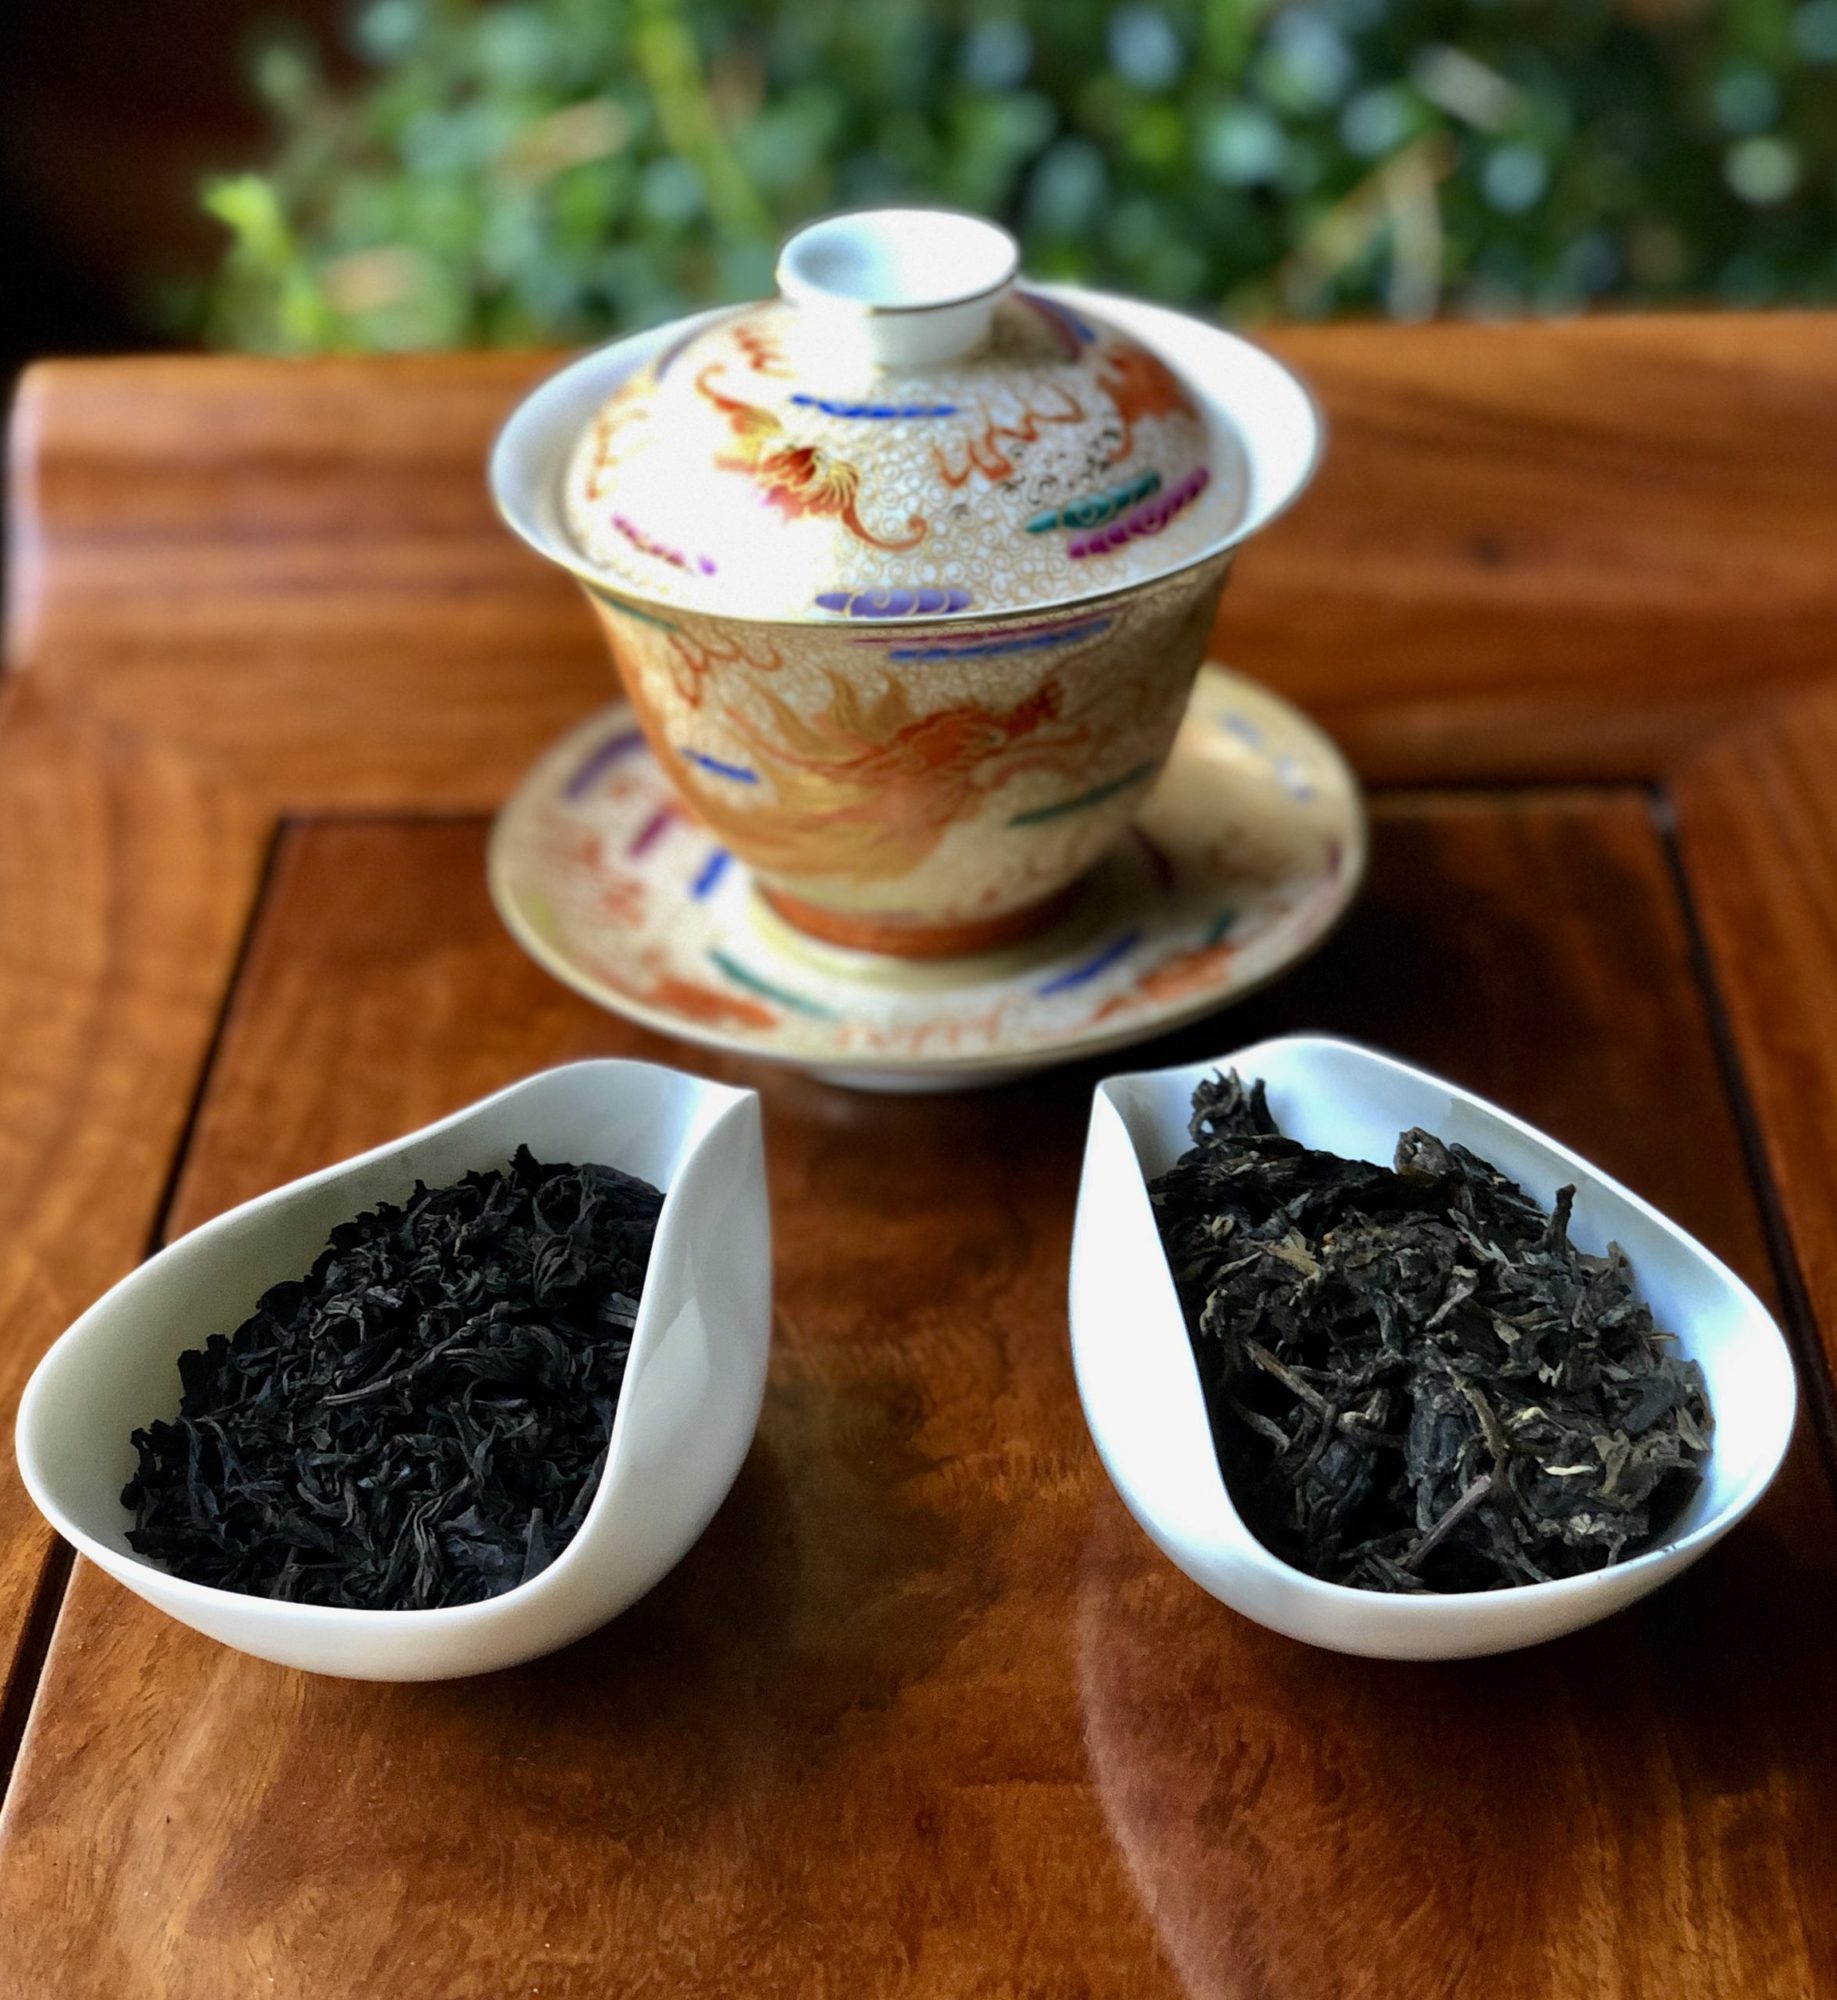 Tea pot and Tea leaves in the table